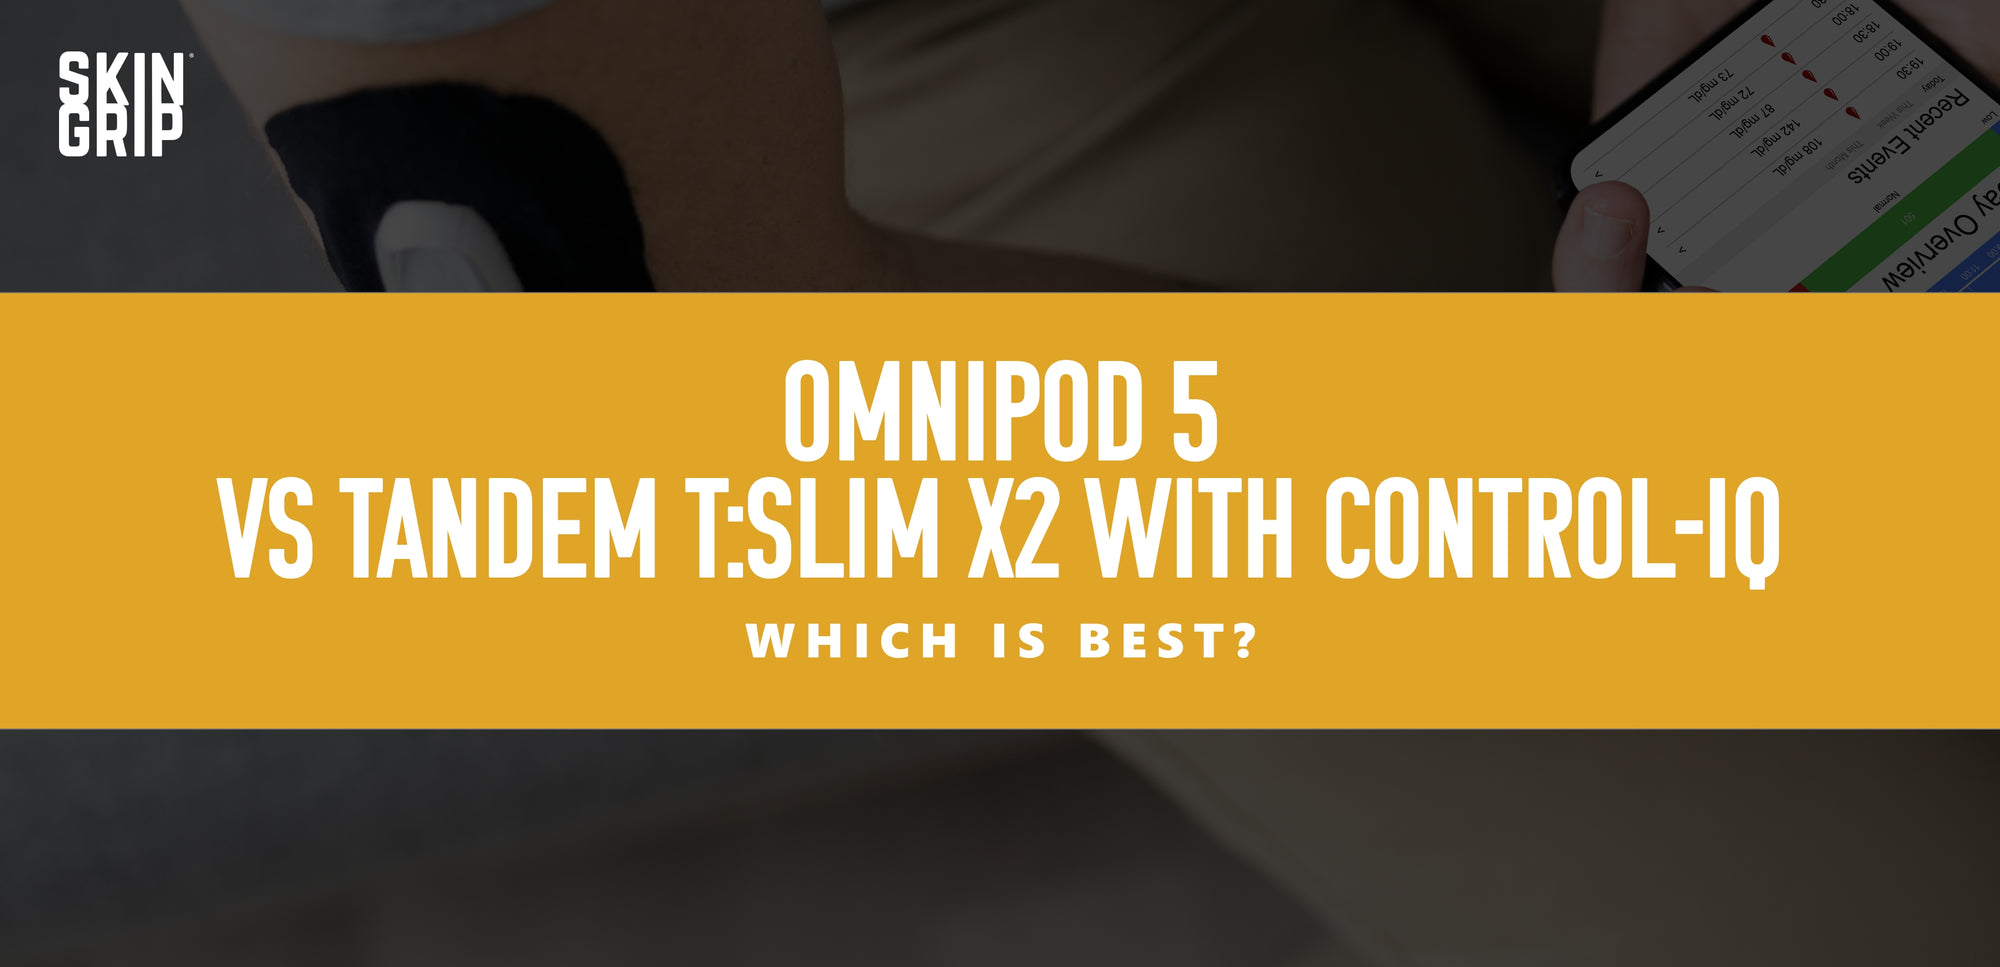 Omnipod 5 vs Tandem t:slim X2 with Control-IQ: Which is Best?